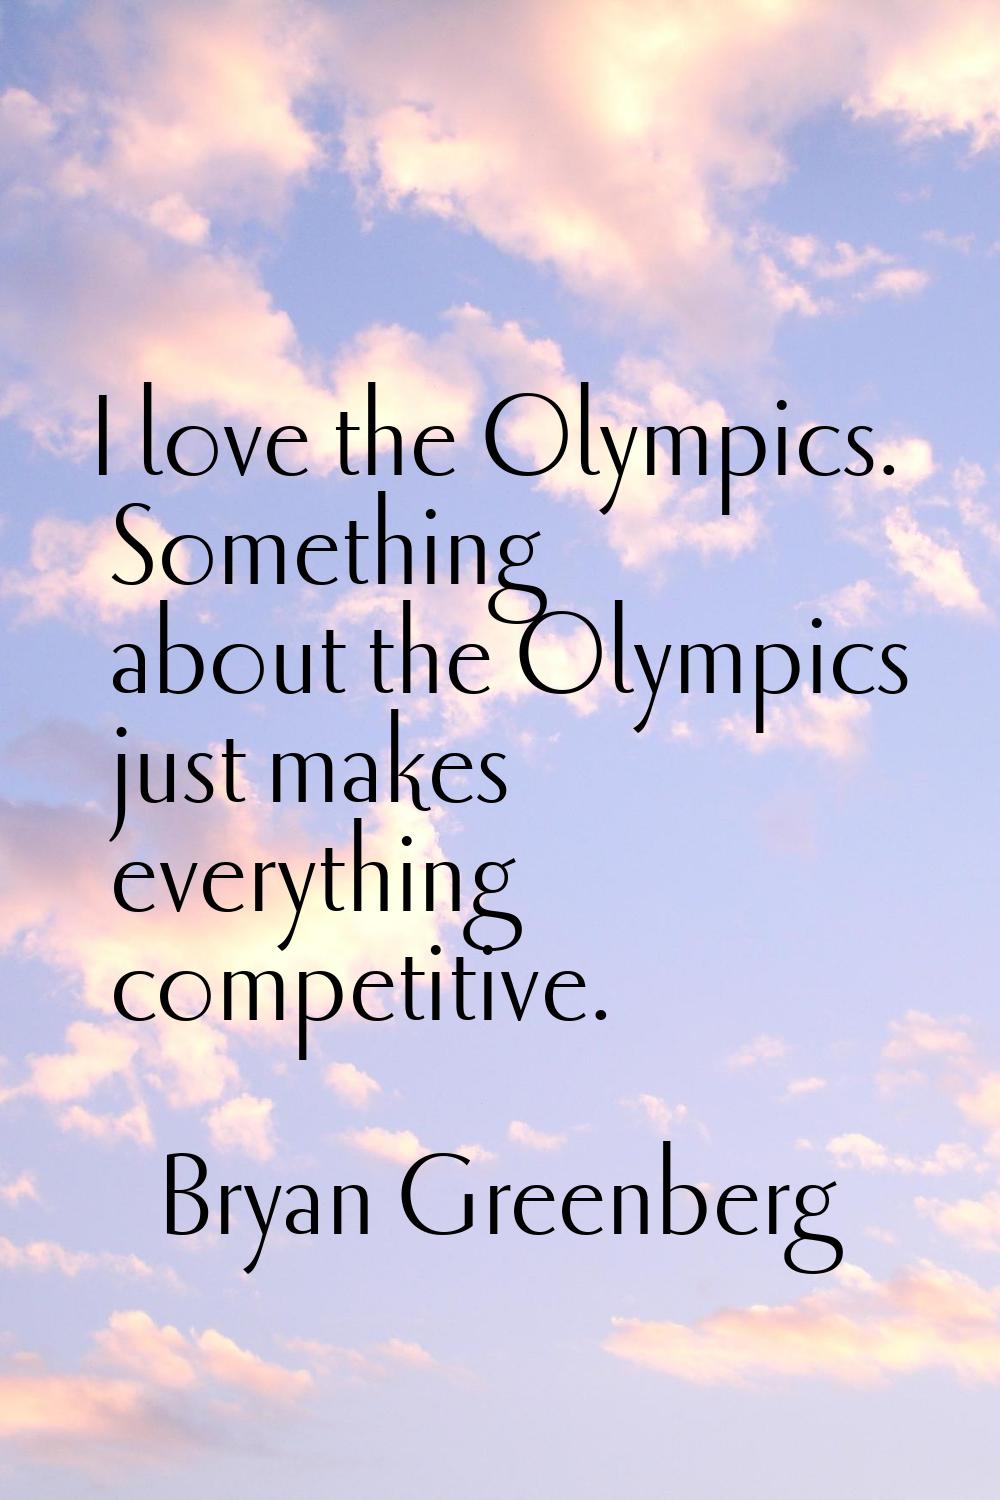 I love the Olympics. Something about the Olympics just makes everything competitive.